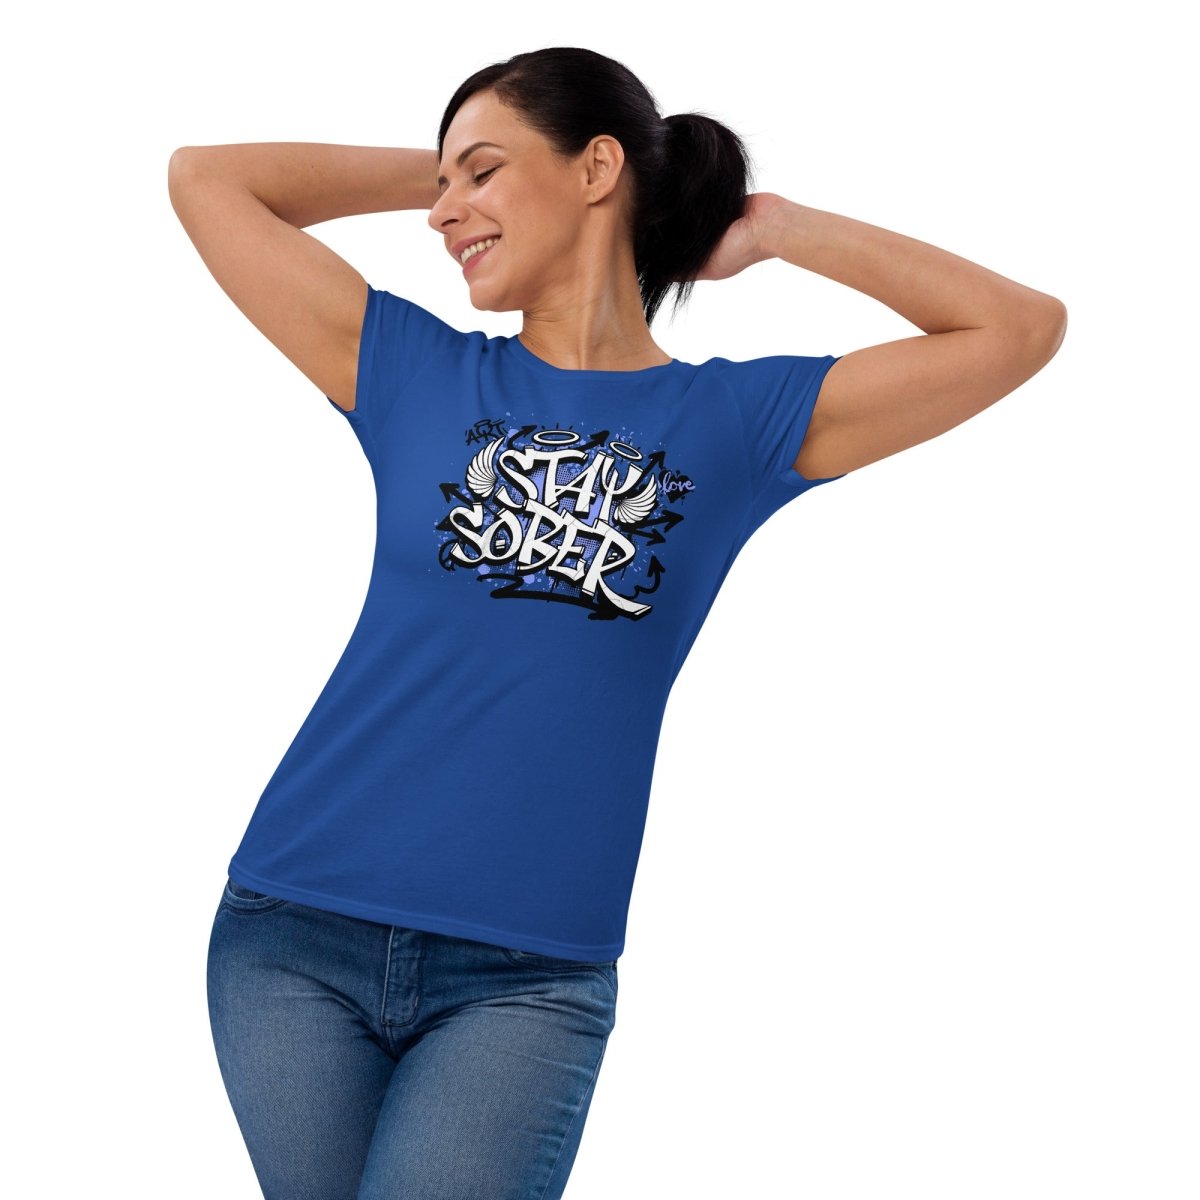 Stay Sober Women's Fashion Fit Tee - Serene Confidence - Sobervation